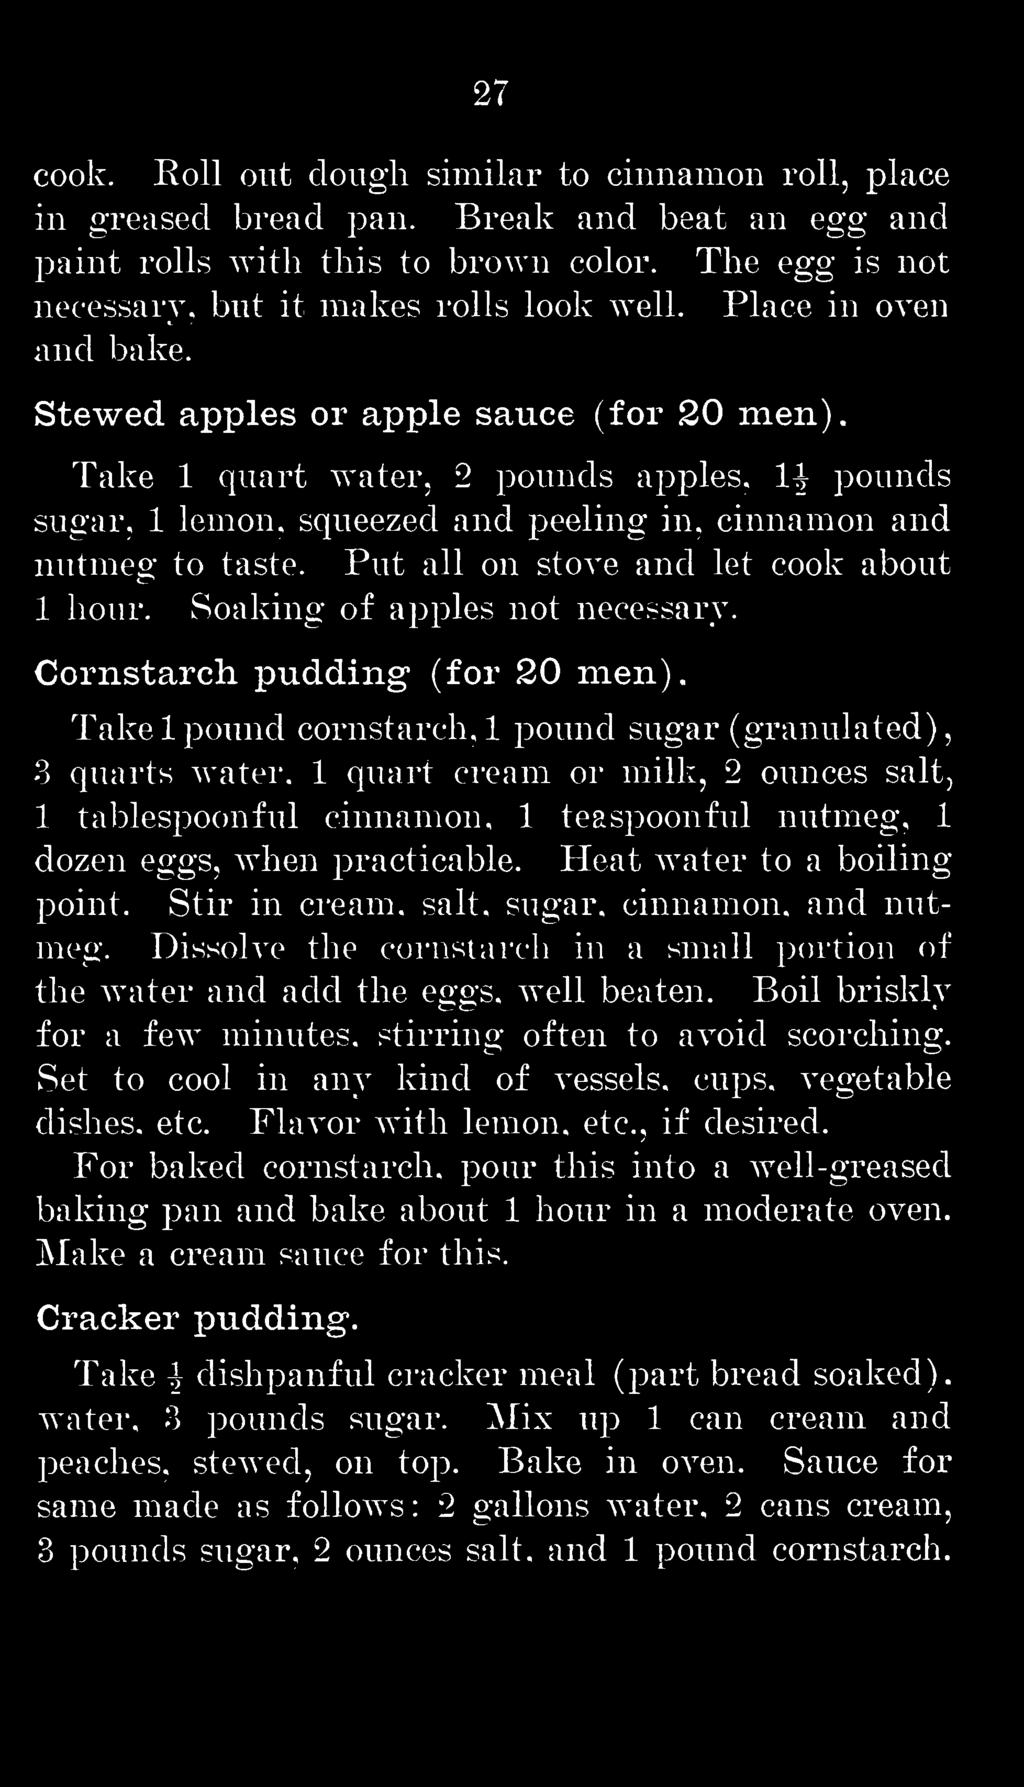 Put all on stove and let cook about 1 hour. Soaking of apples not necessary. Cornstarch pudding (for 20 men).